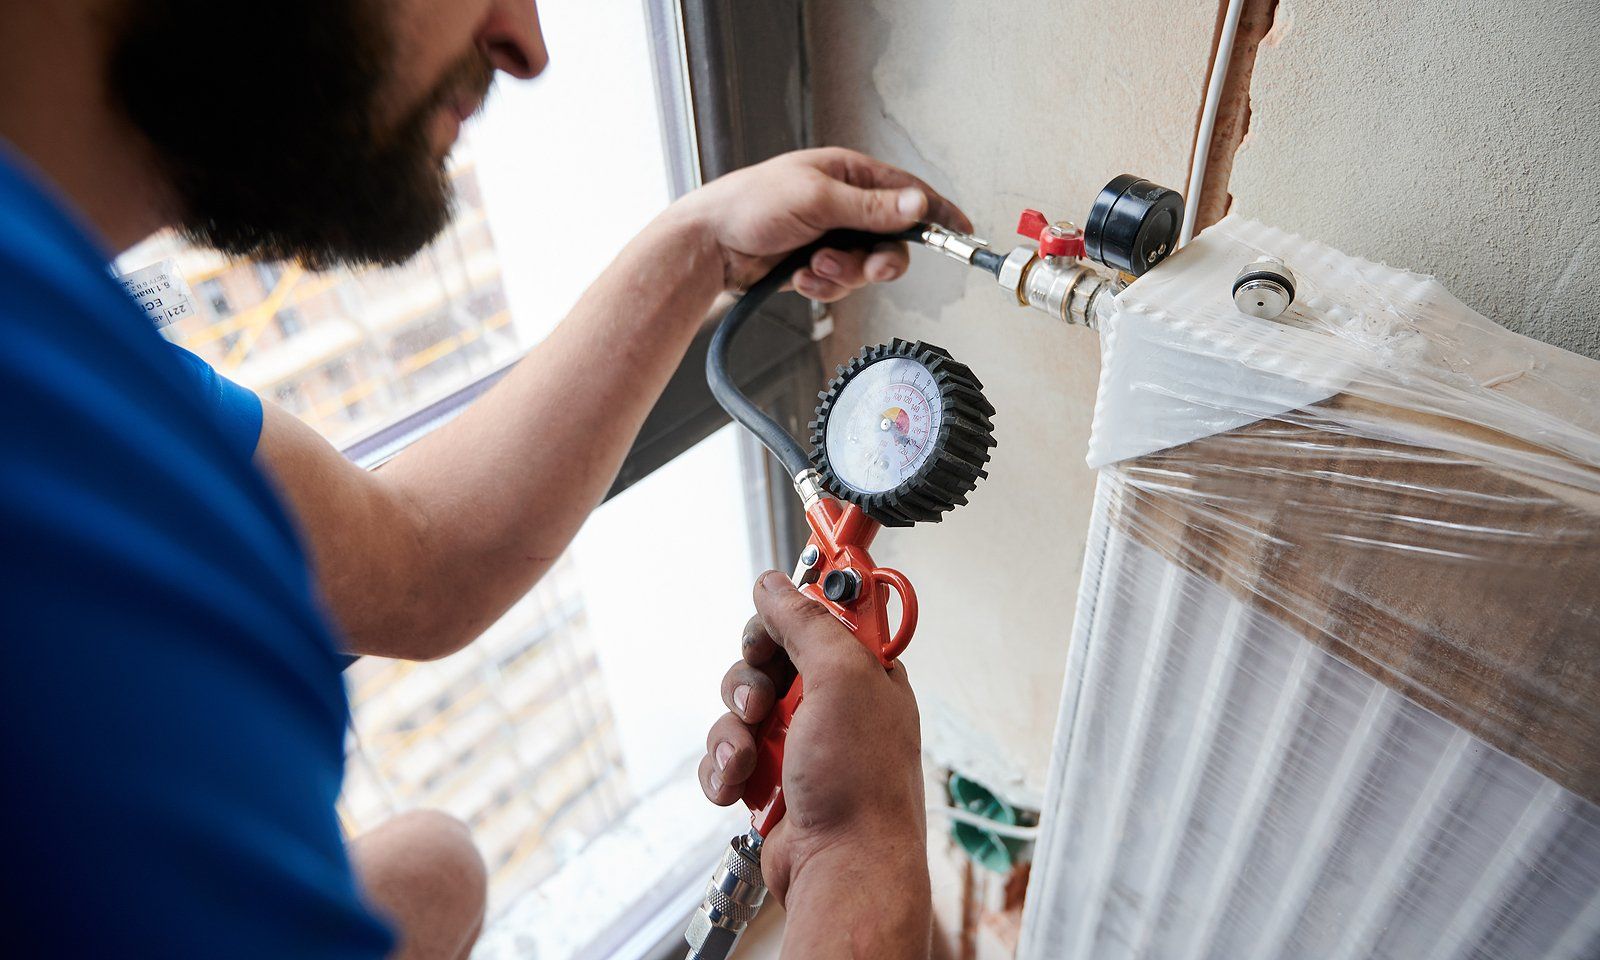 High-Quality HVAC Service and Repairs Near You